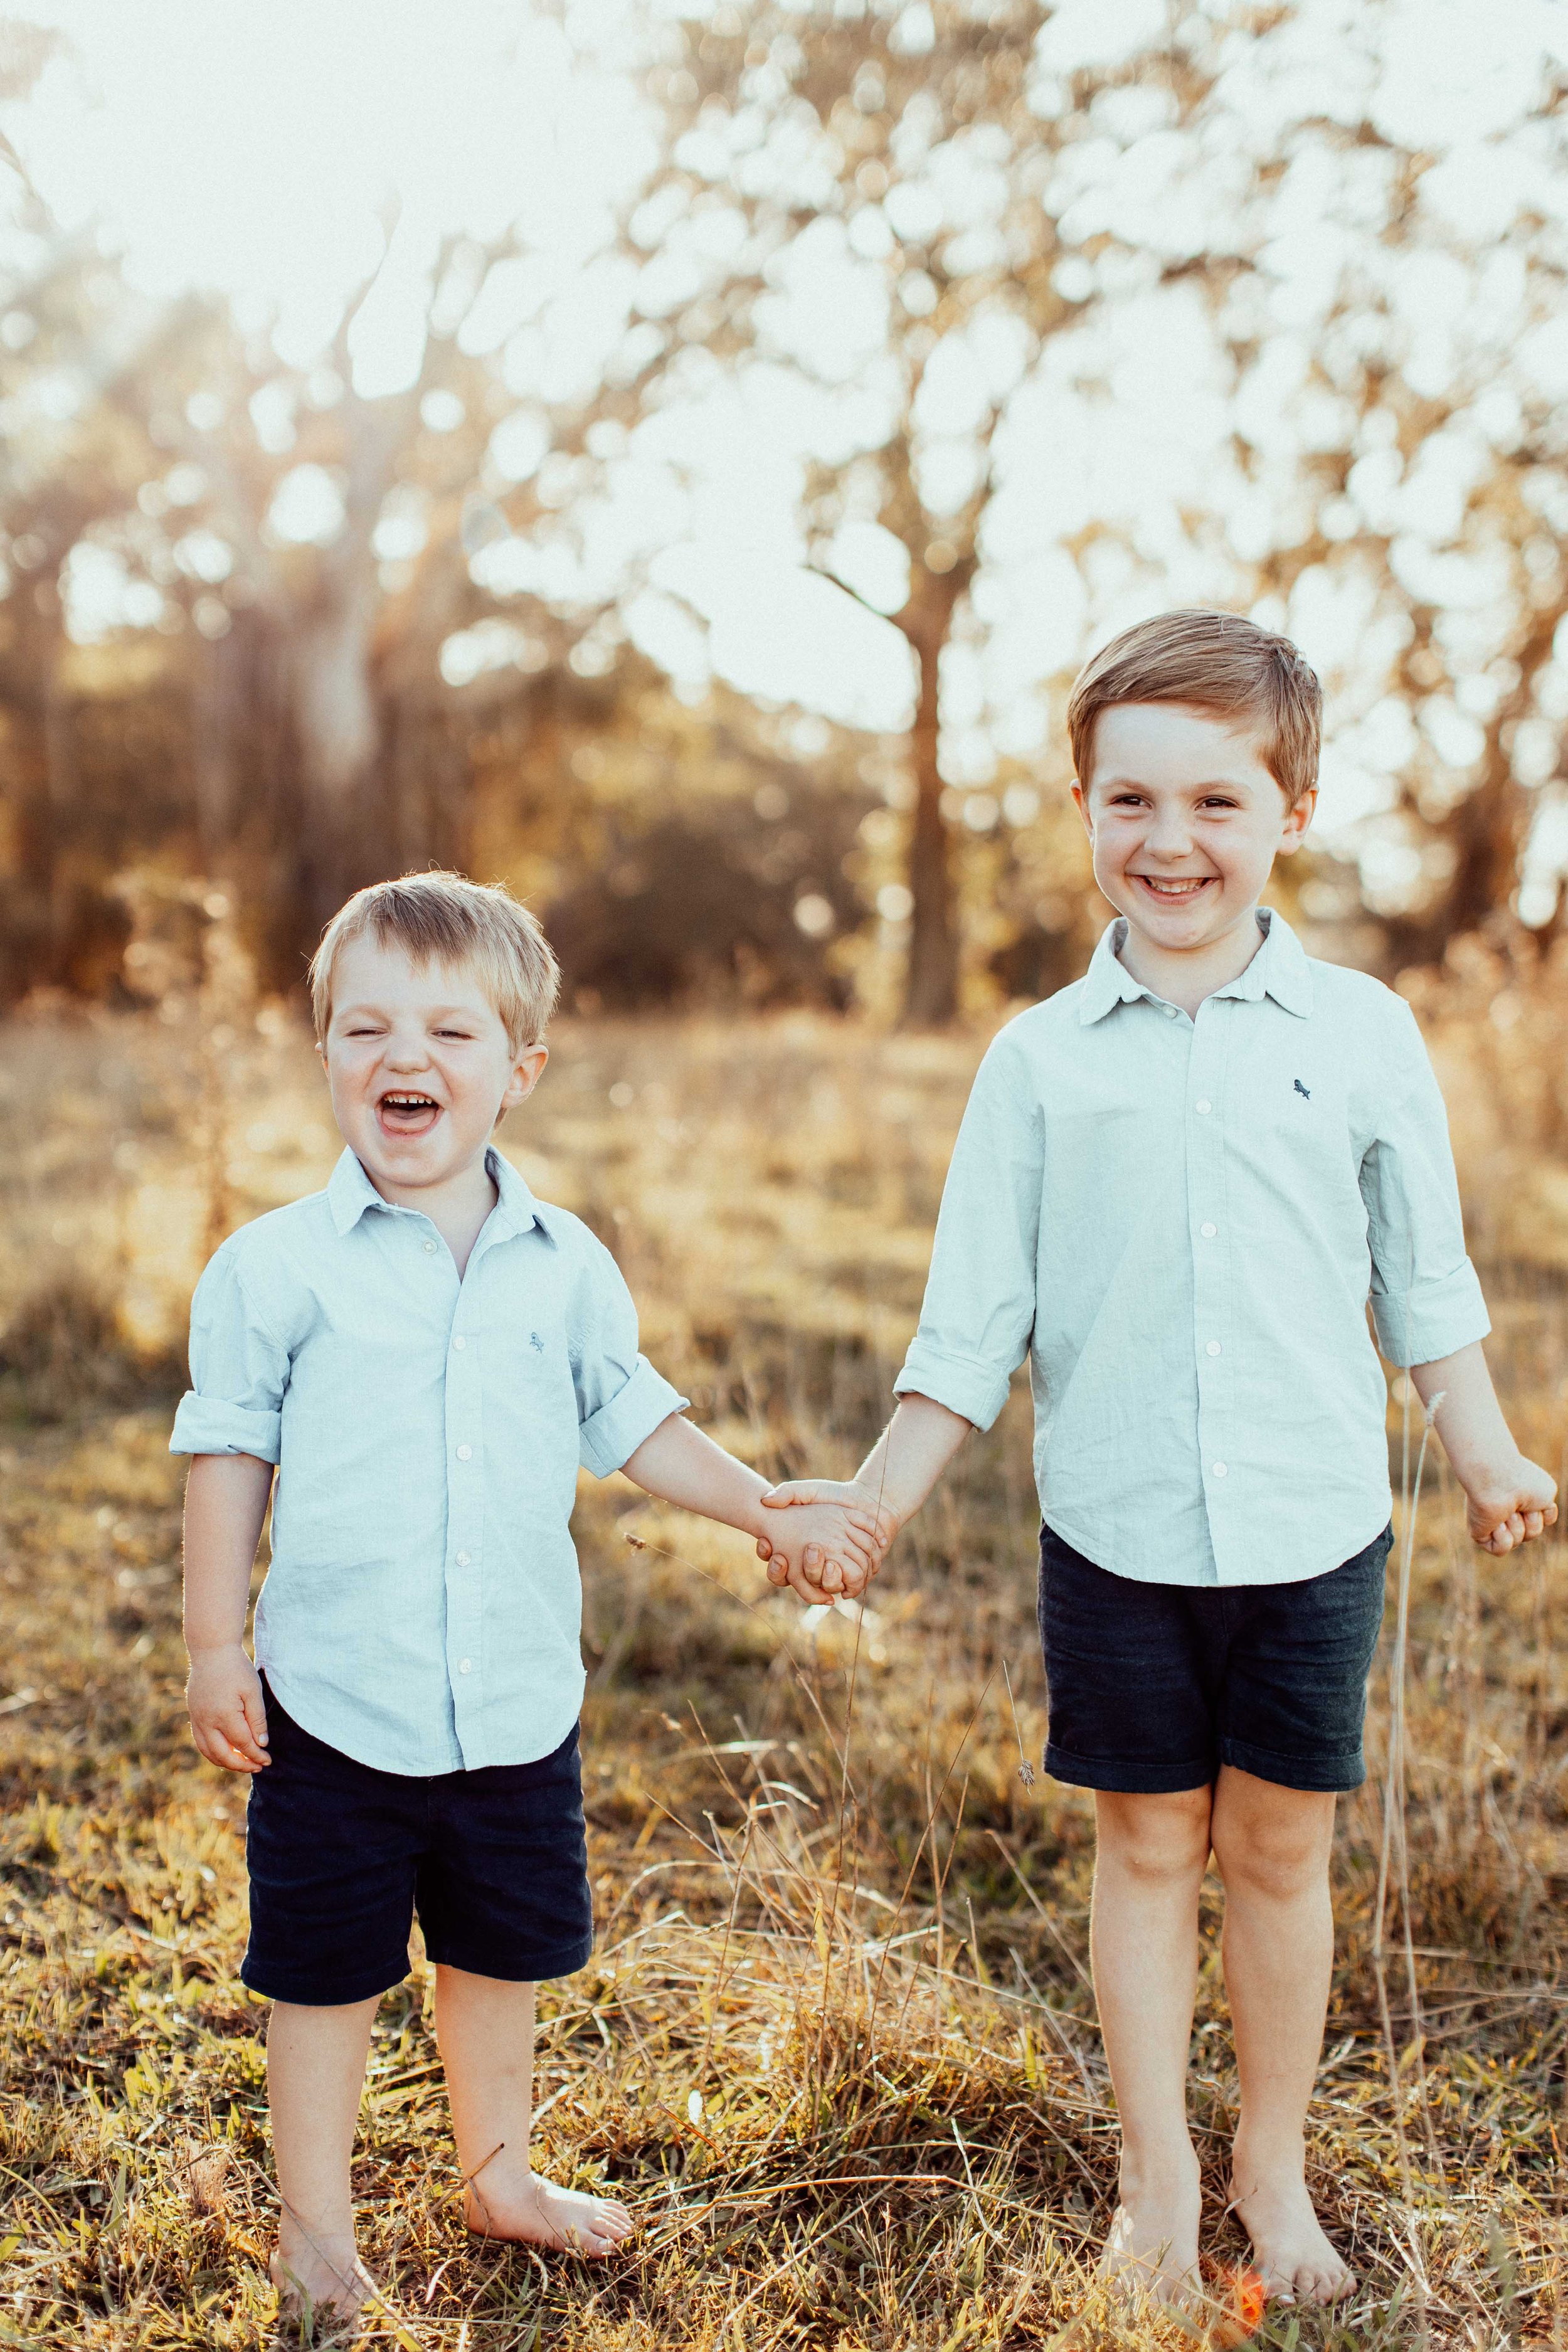 durney-family-exeter-southern-highlands-bowral-inhome-family-lifestyle-wollondilly-camden-macarthur-sydney-photography-www.emilyobrienphotography.net-44.jpg